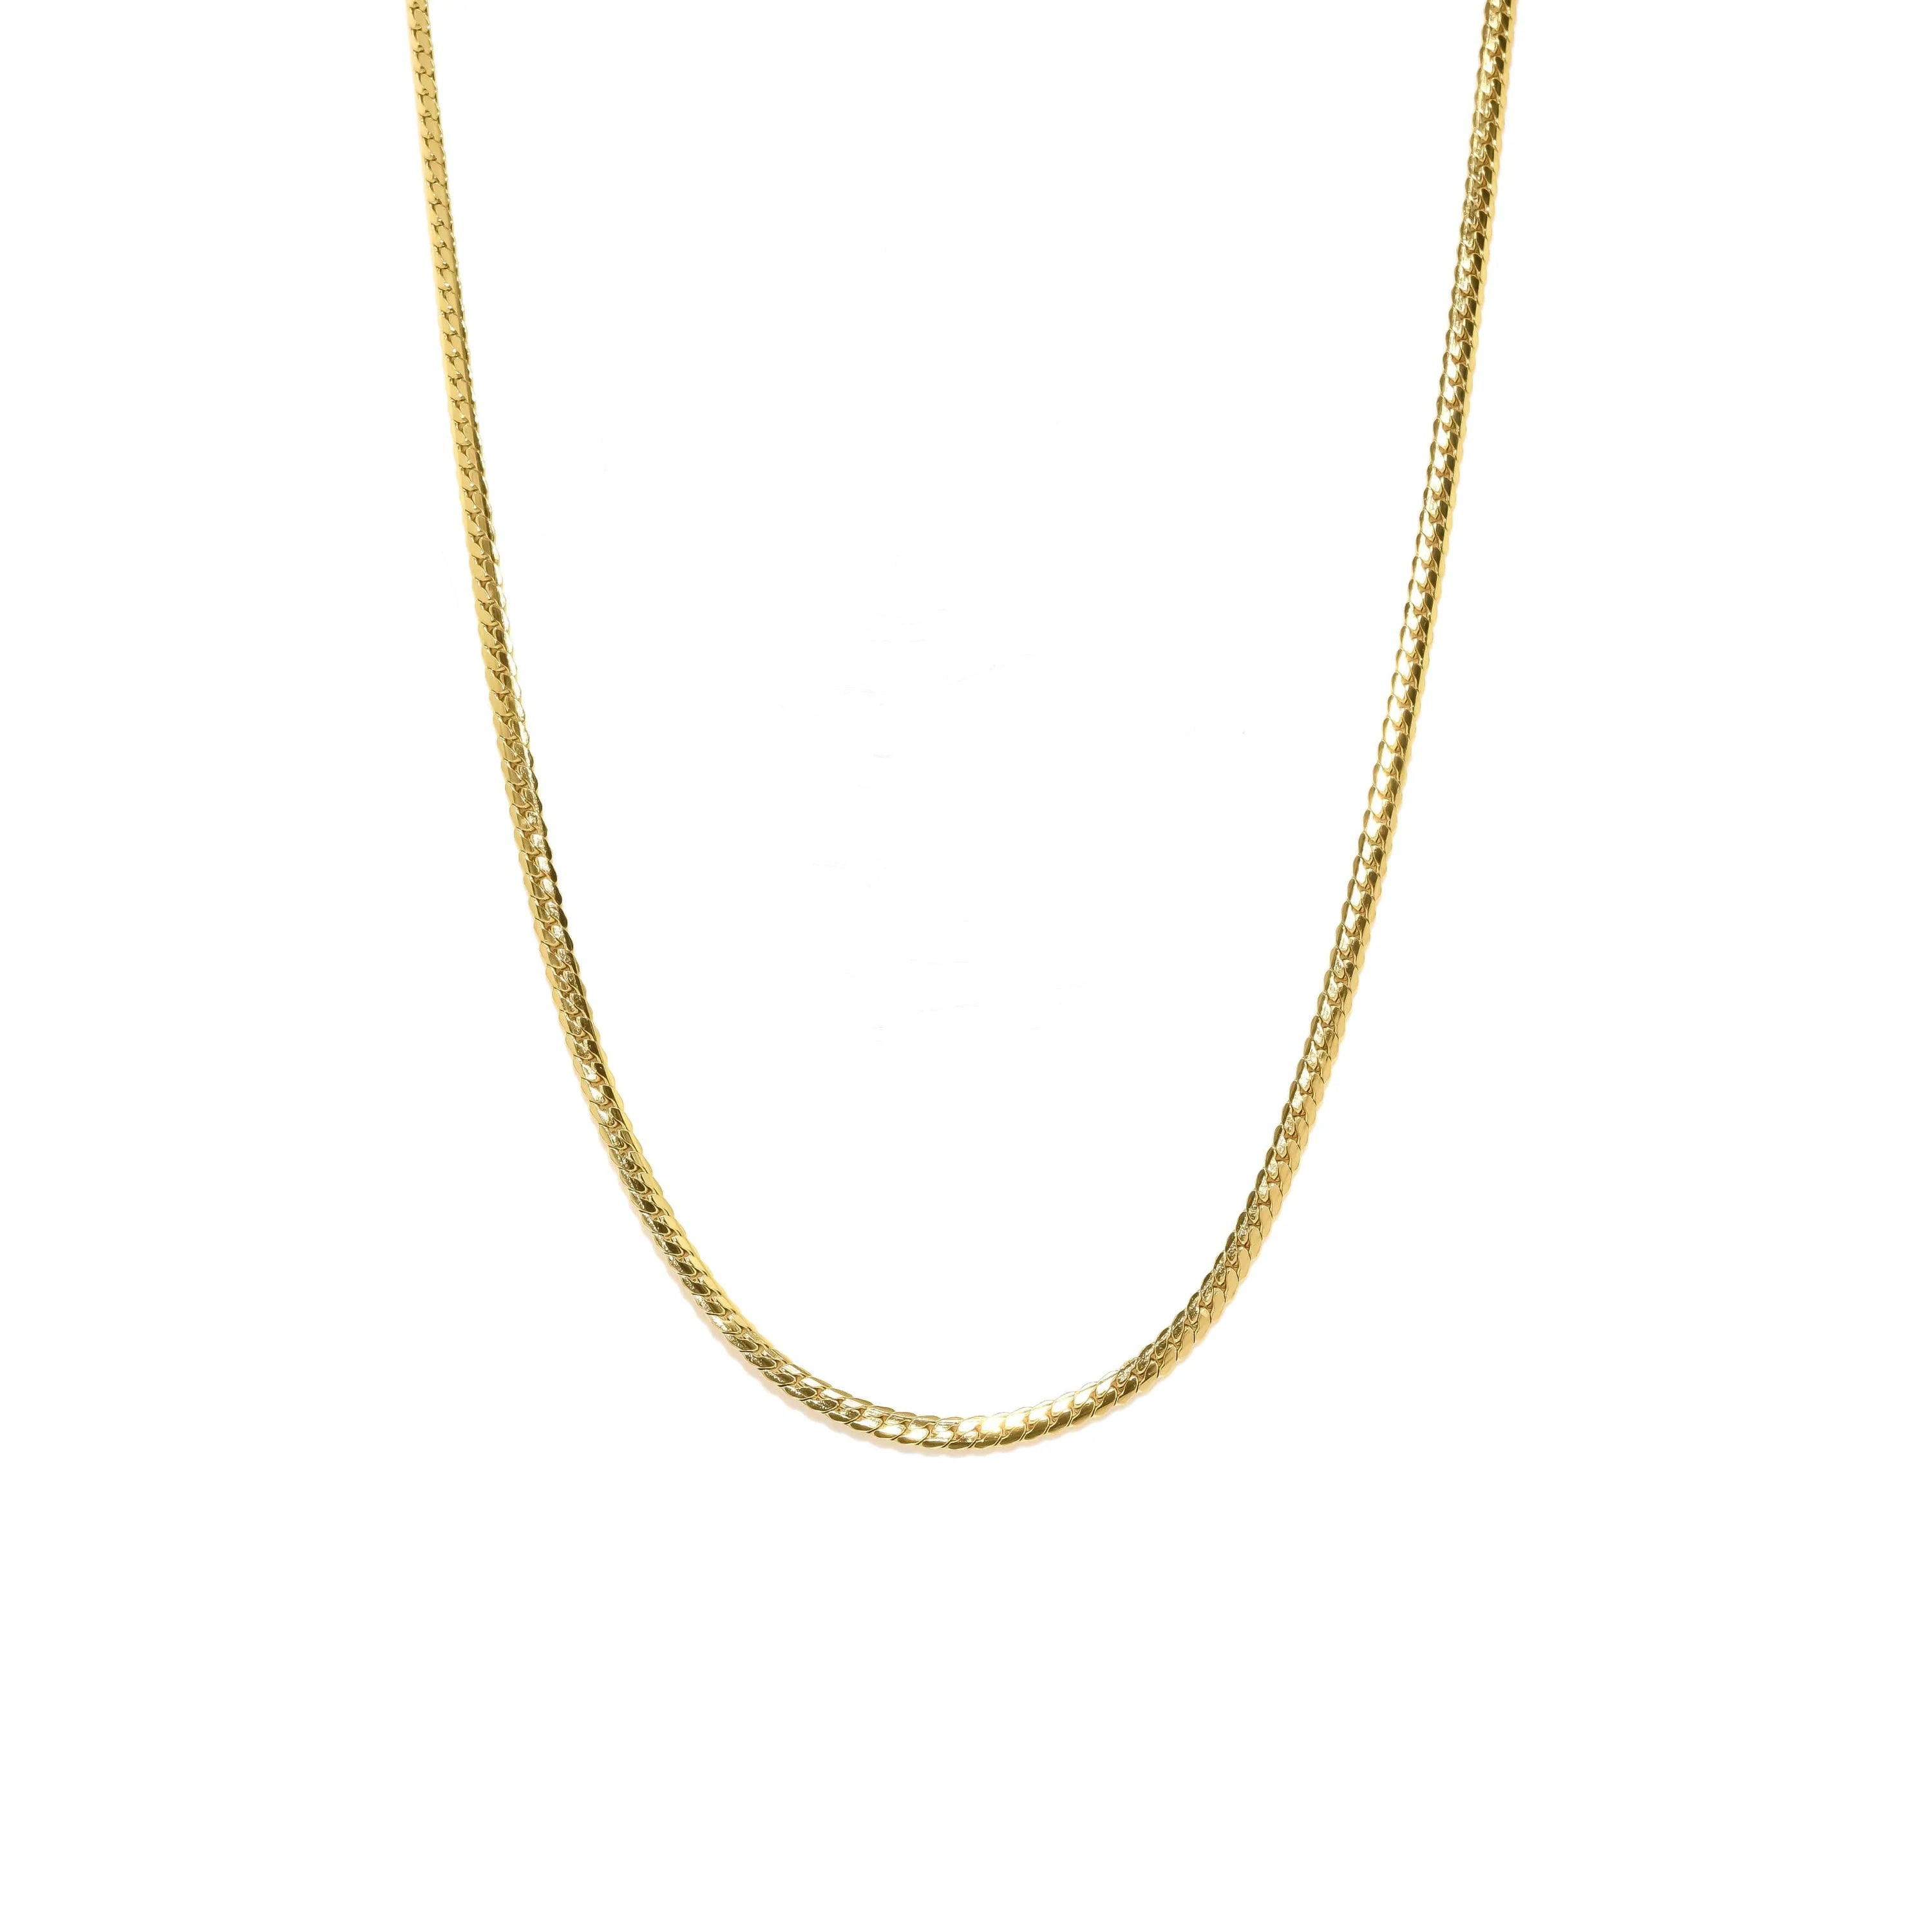 Requisite Boxy Link Chain Necklace Gold